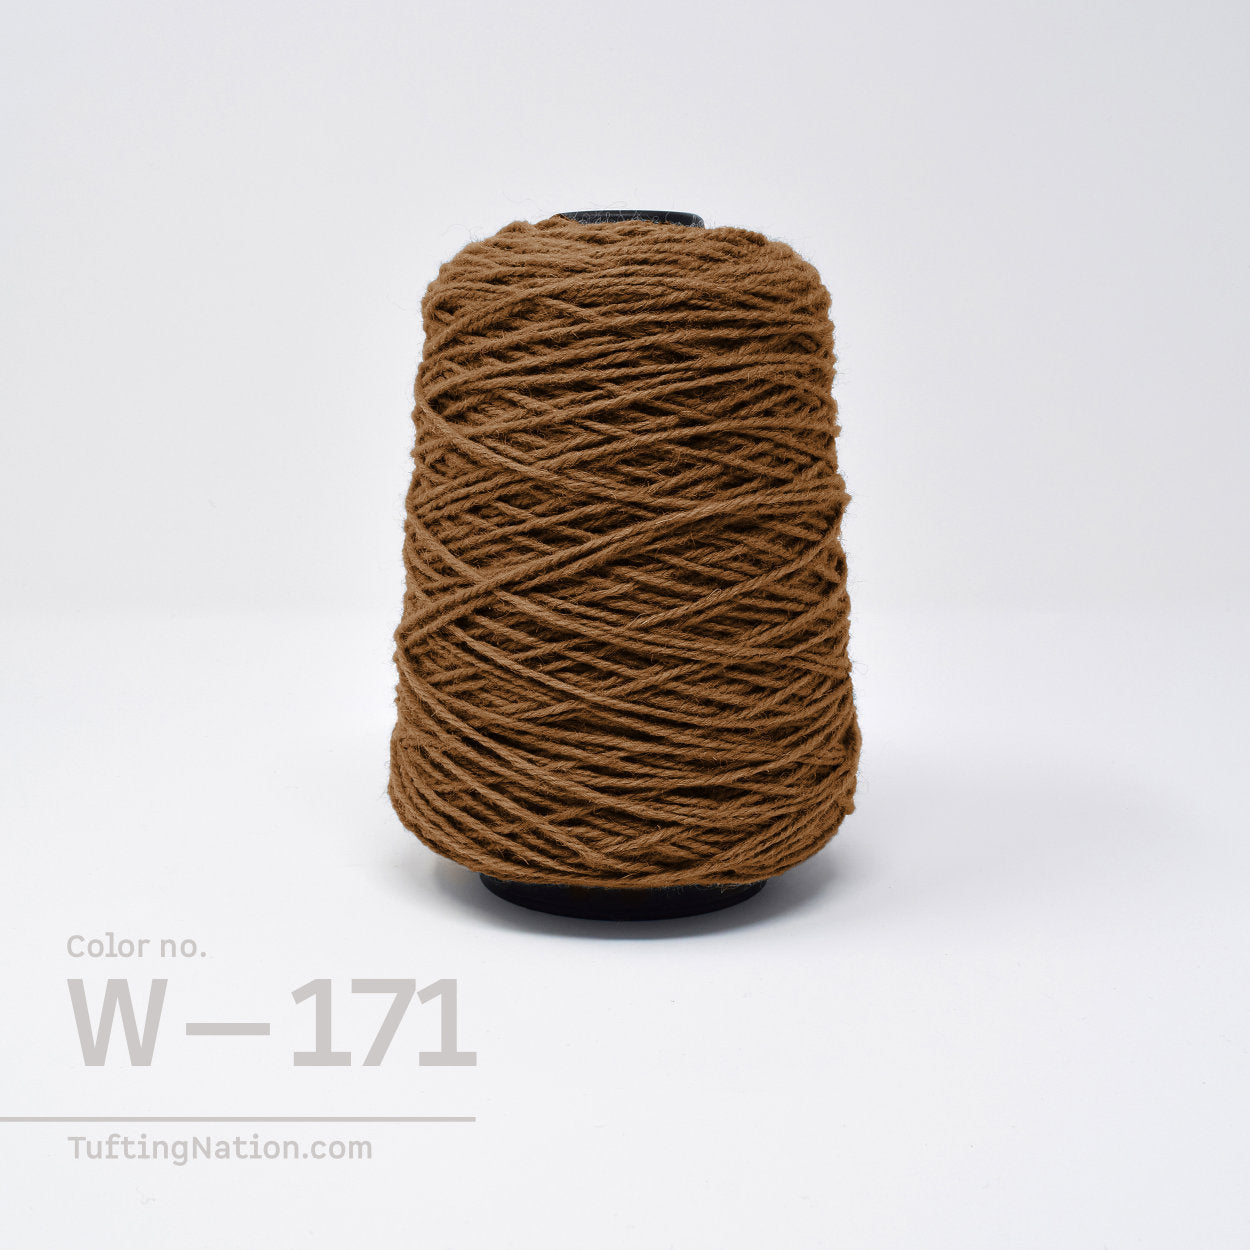 Coffee Brown Tufting Yarn On Spool for Rug Tufting, Weaving and Punch Needle | TuftingNation